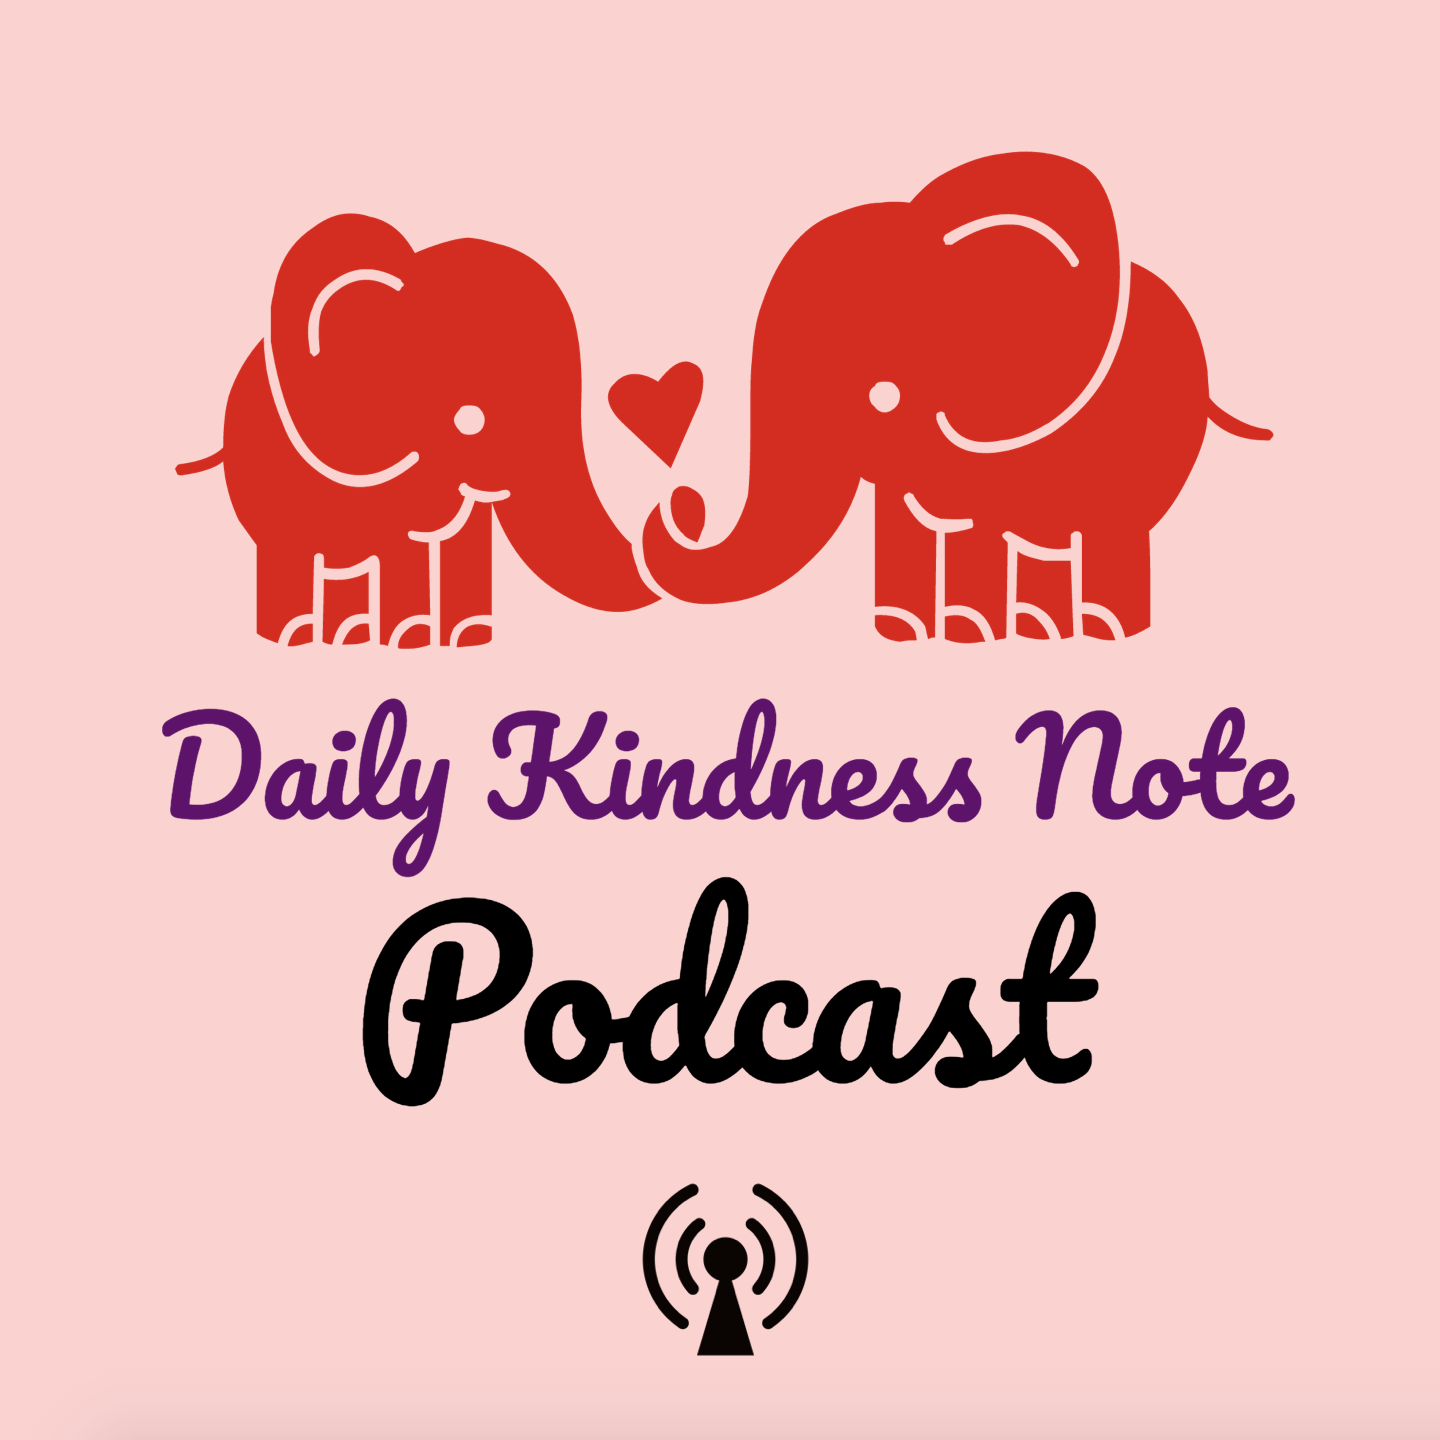 Daily Kindness Note Podcast - Ep. 14: You Deserve Your Own Trust